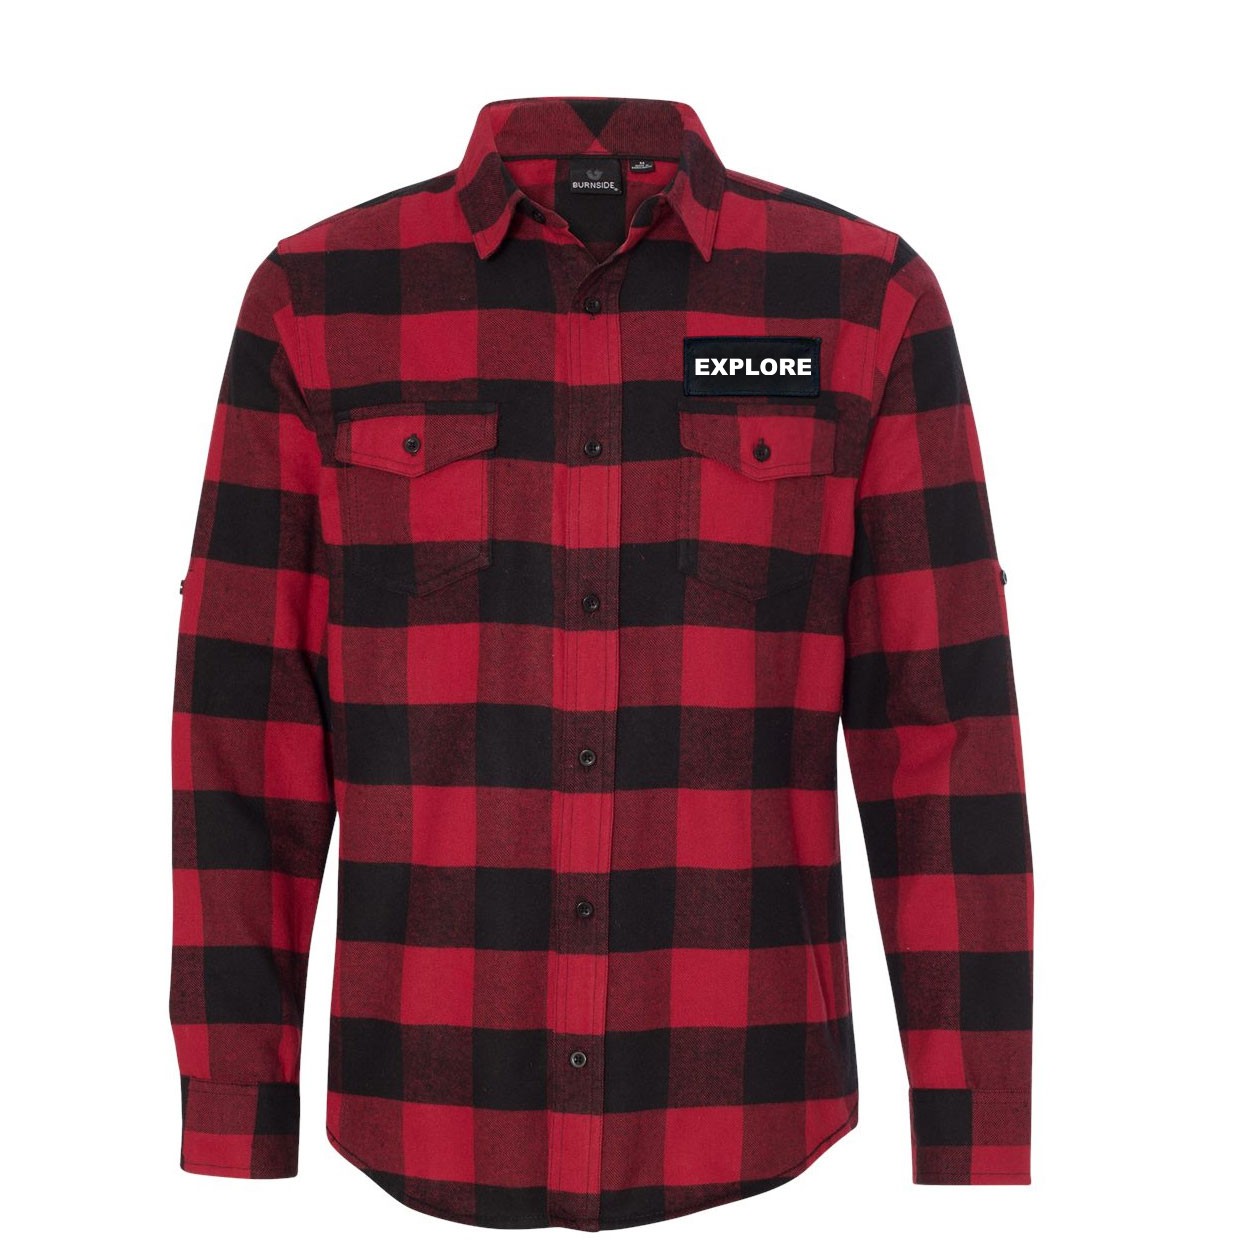 Explore Brand Logo Night Out Rectangle Woven Patch Flannel Shirt Long Sleeve Red/Black Buffalo (White Logo)